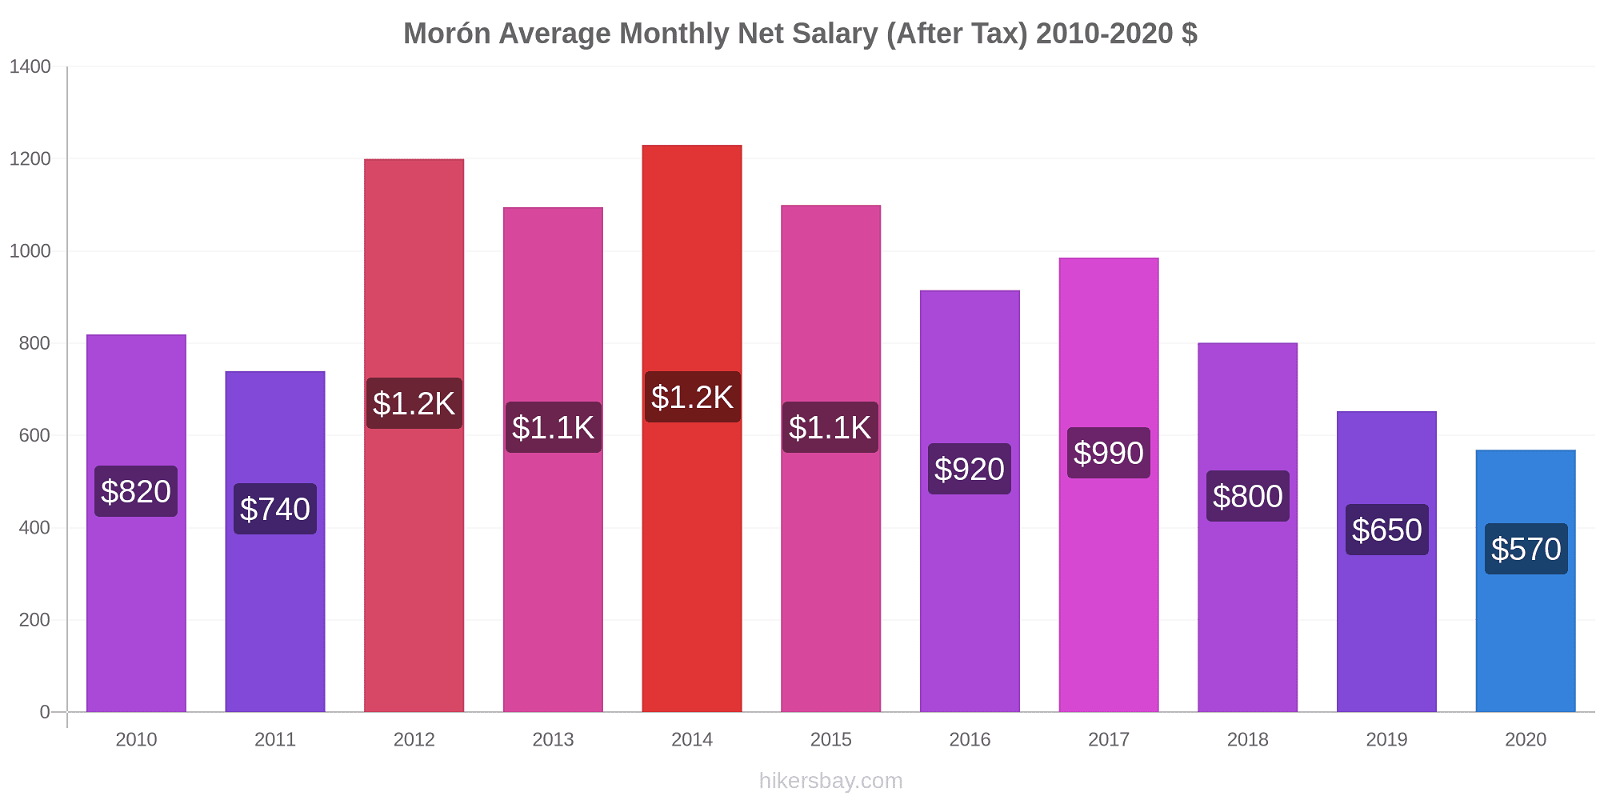 Morón price changes Average Monthly Net Salary (After Tax) hikersbay.com